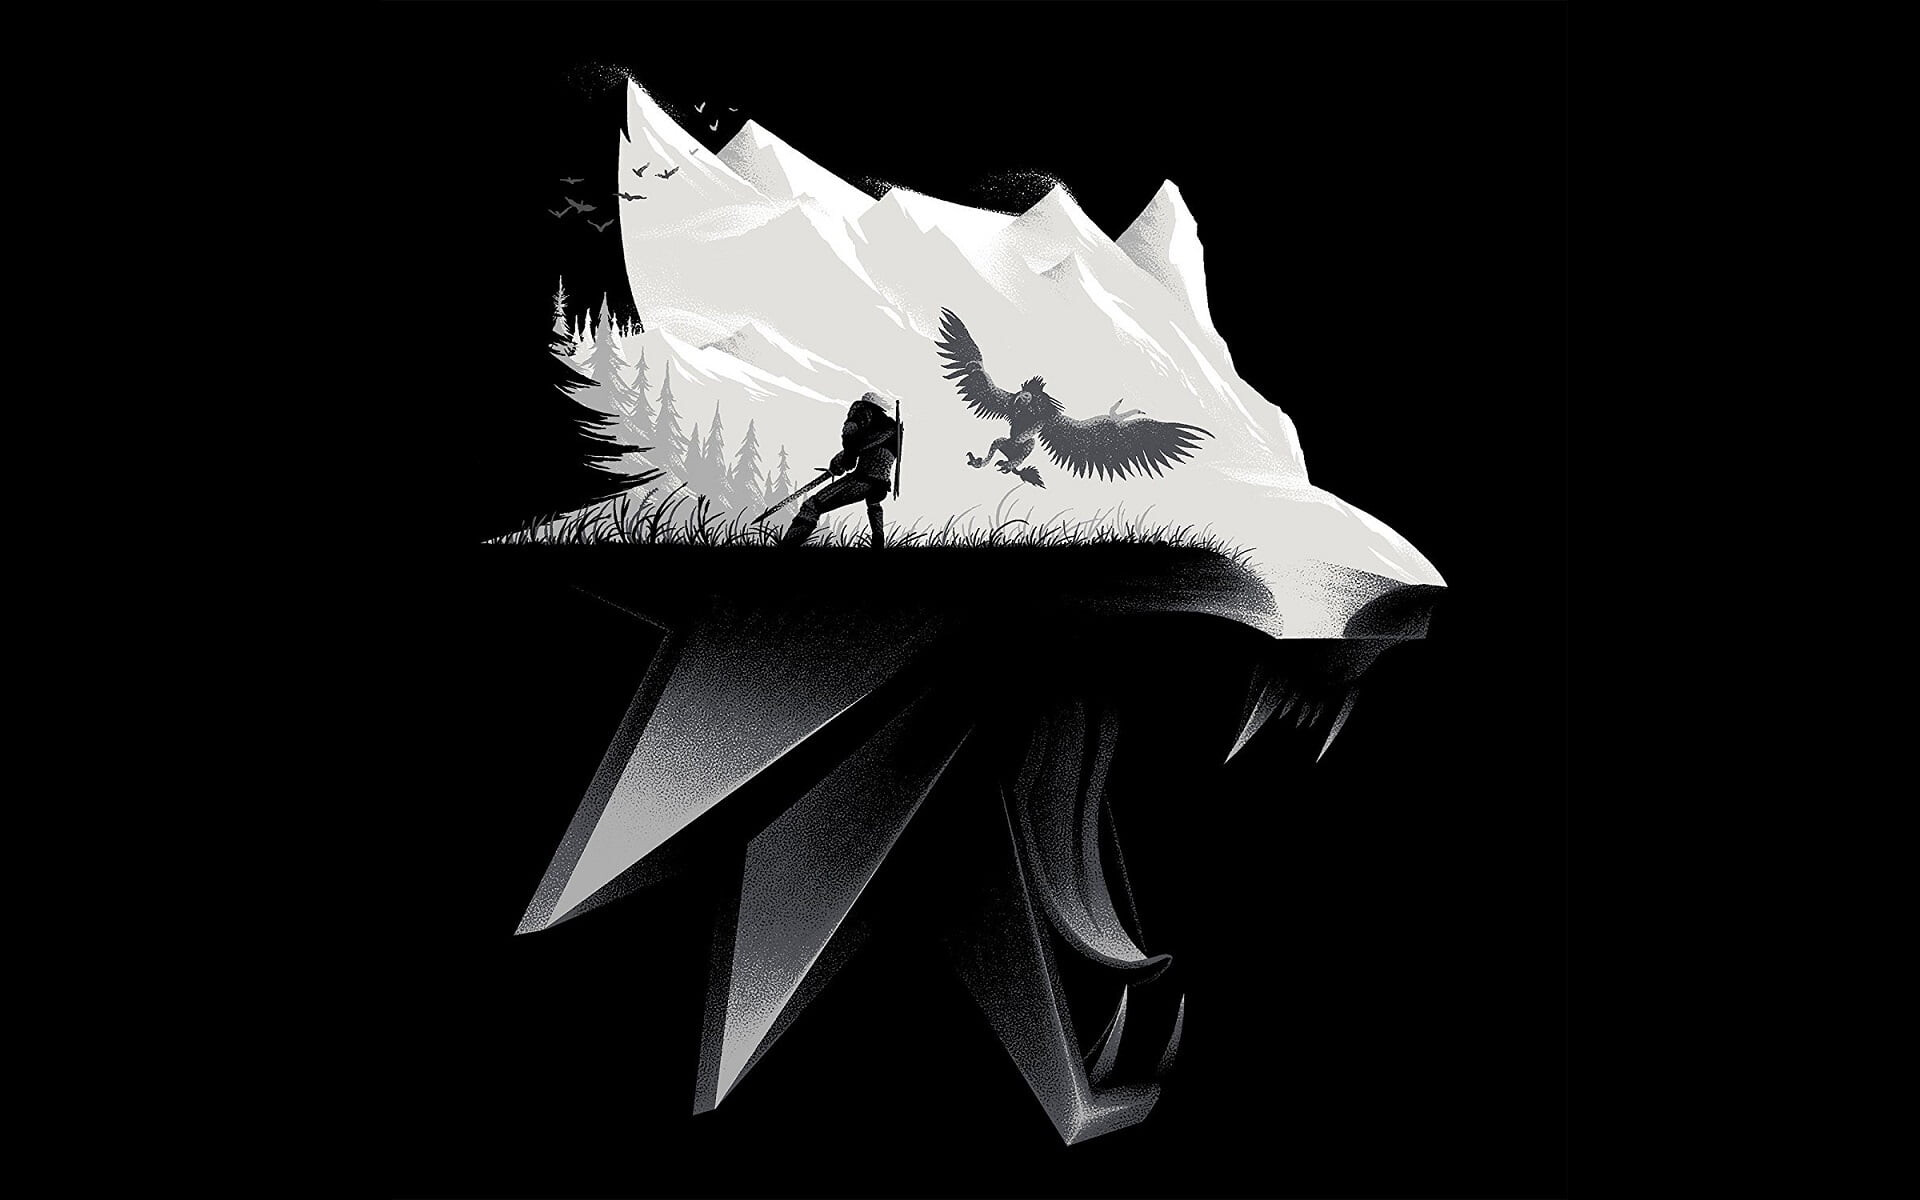 The Witcher (Game): A fantasy action role-playing games developed by CD Projekt, Black and white. 1920x1200 HD Wallpaper.